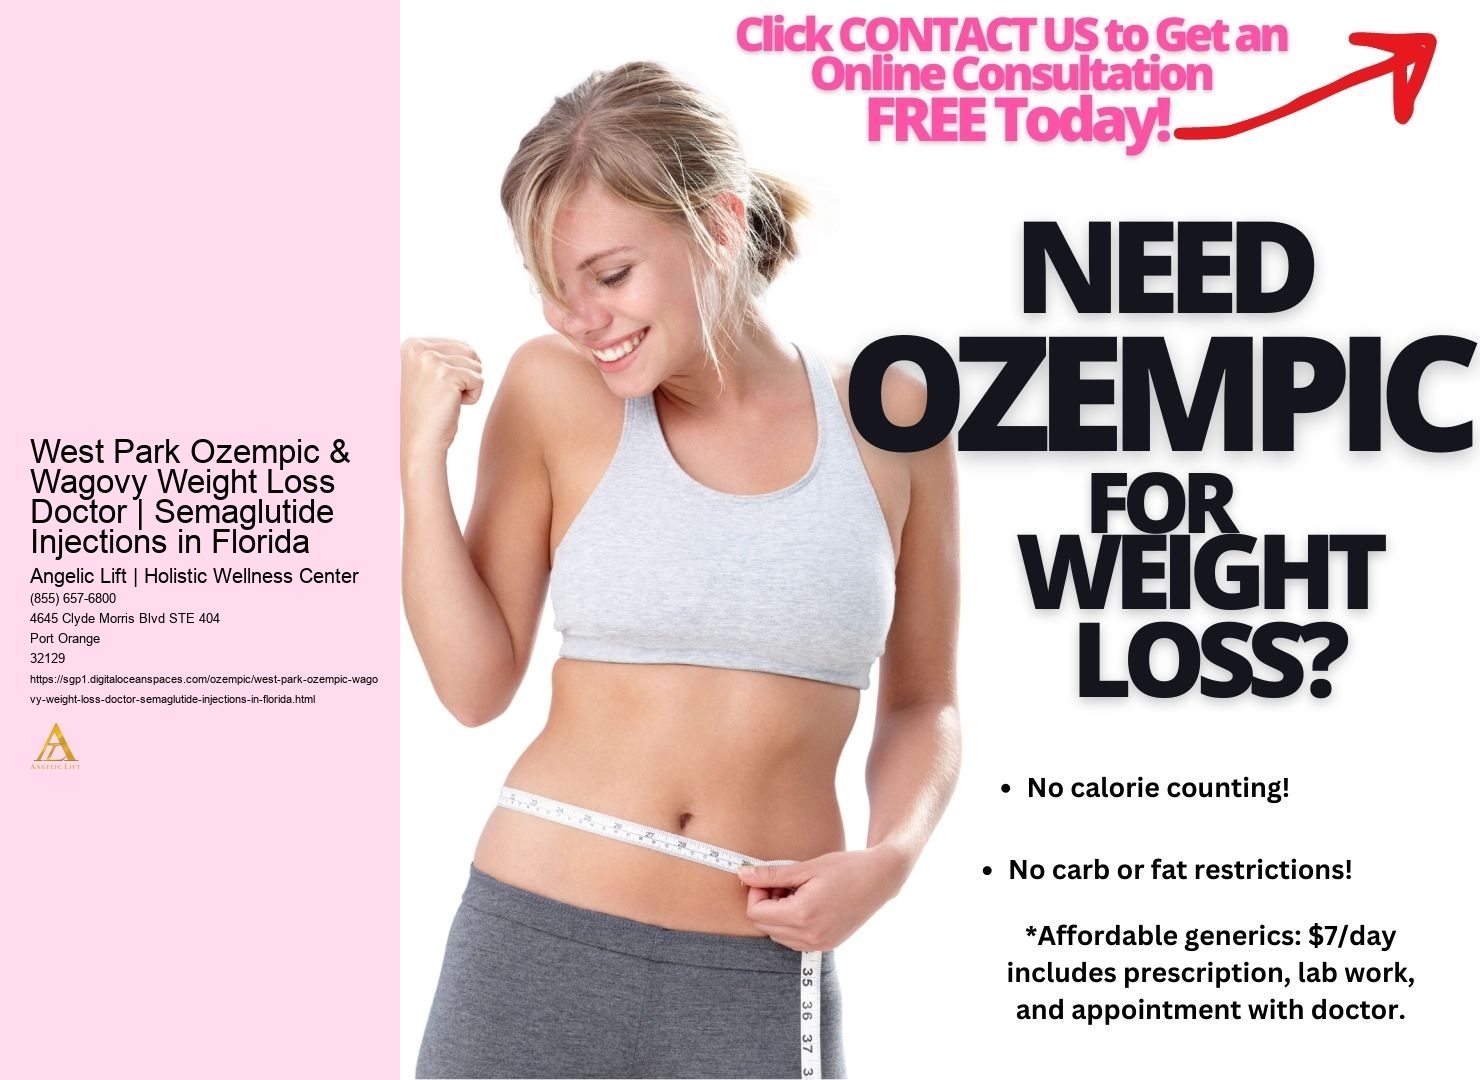 West Park Ozempic & Wagovy Weight Loss Doctor | Semaglutide Injections in Florida